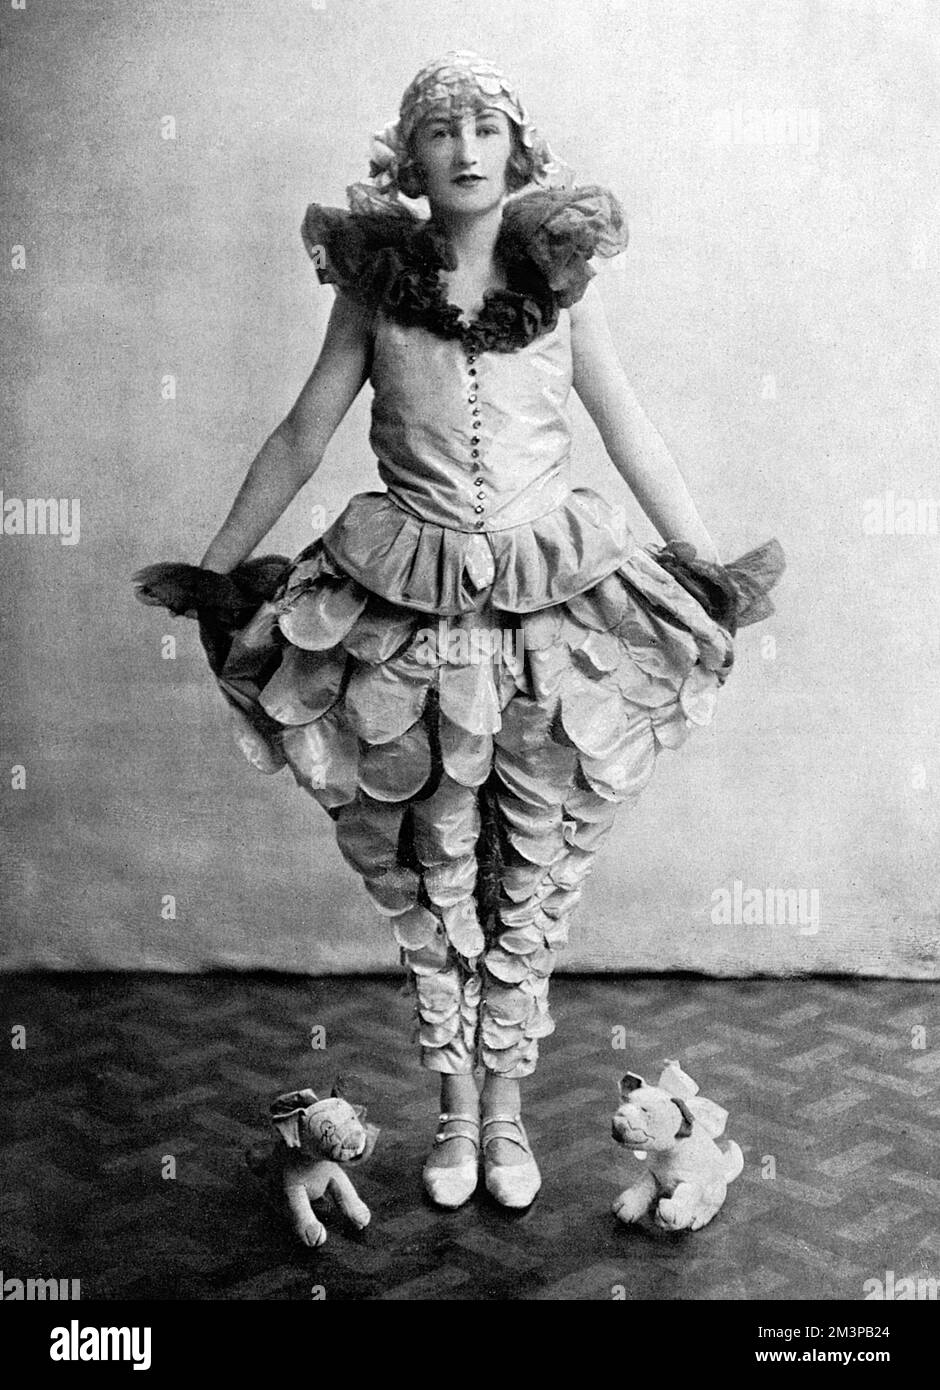 Actress Stephanie Stephens posed in one of her costumes from the musical comedy, Queen High at the Queen's Theatre in 1926.  At her feet are two plush toys in the image of the famous cartoon dog by George Studdy, Bonzo, who was at the height of his fame at that point.  The photograph is published in The Sketch - the magazine also published Studdy's cartoons of Bonzo.     Date: 1926 Stock Photo